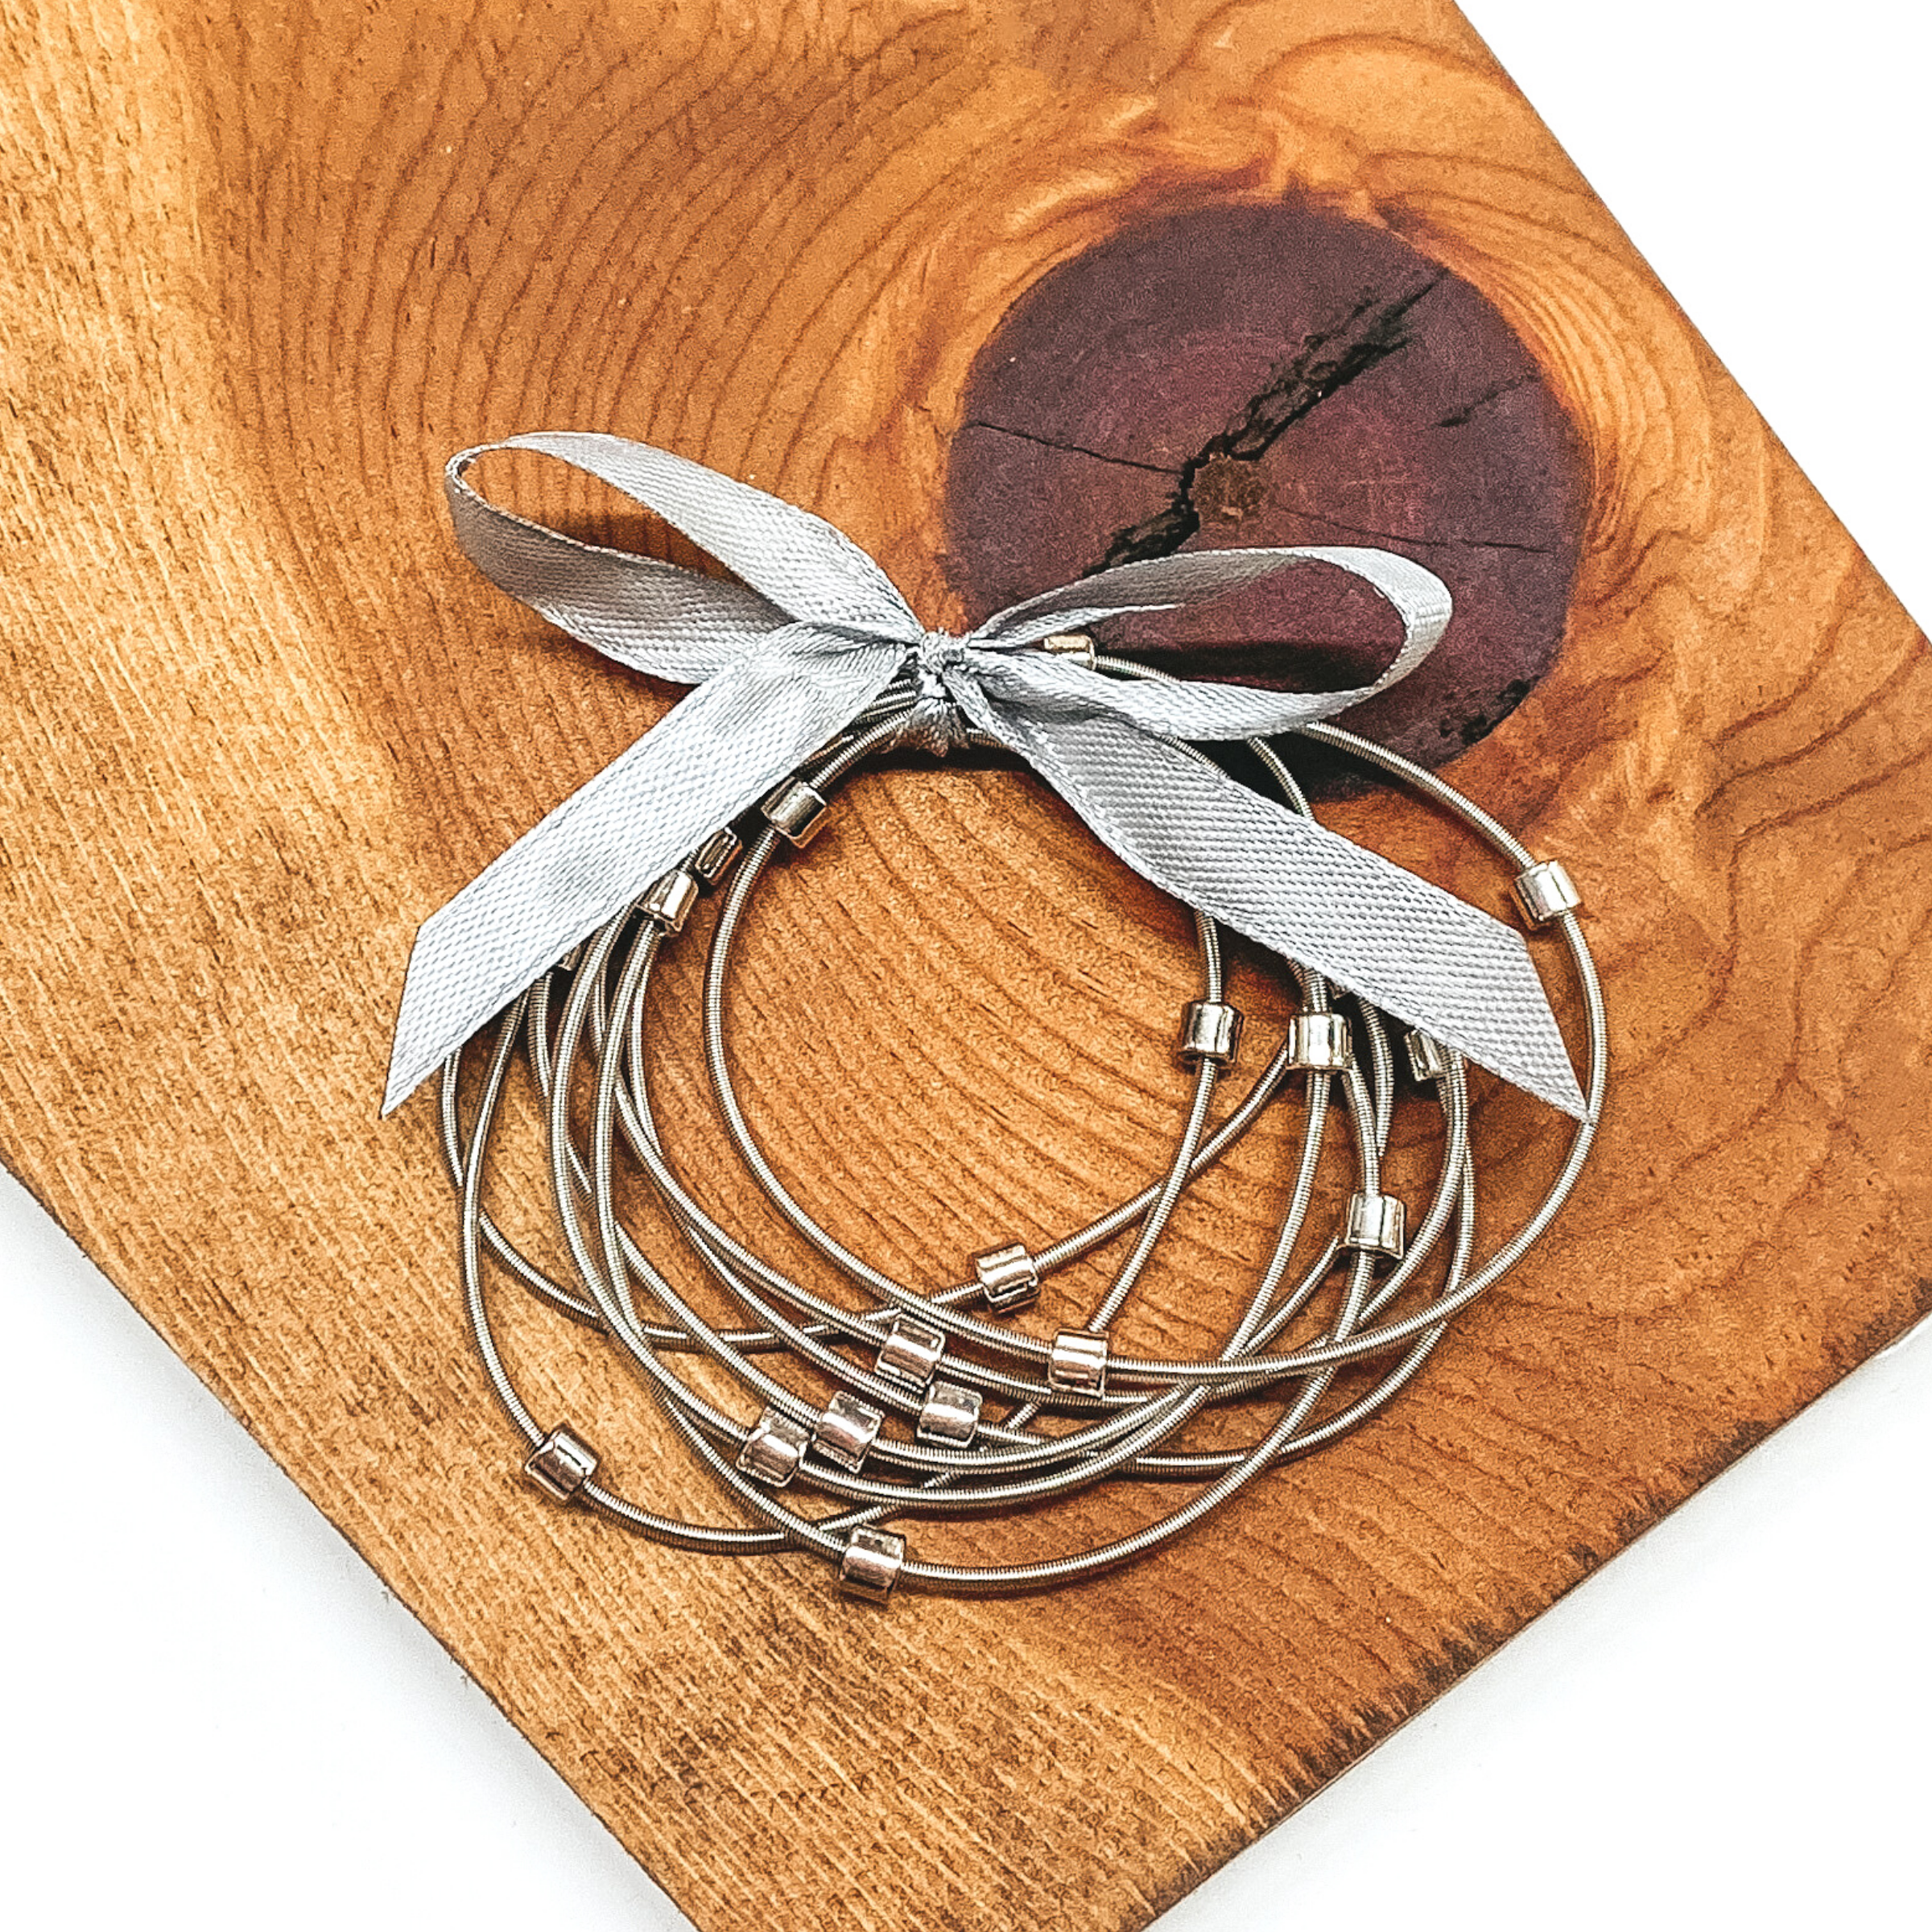 Group of silver spring wire elastic bracelet set tied together with a silver ribbon that is tied in a bow. All of the bracelets have small silver beads. This bracelet set is pictured laying next on a piece of wood on a white background.